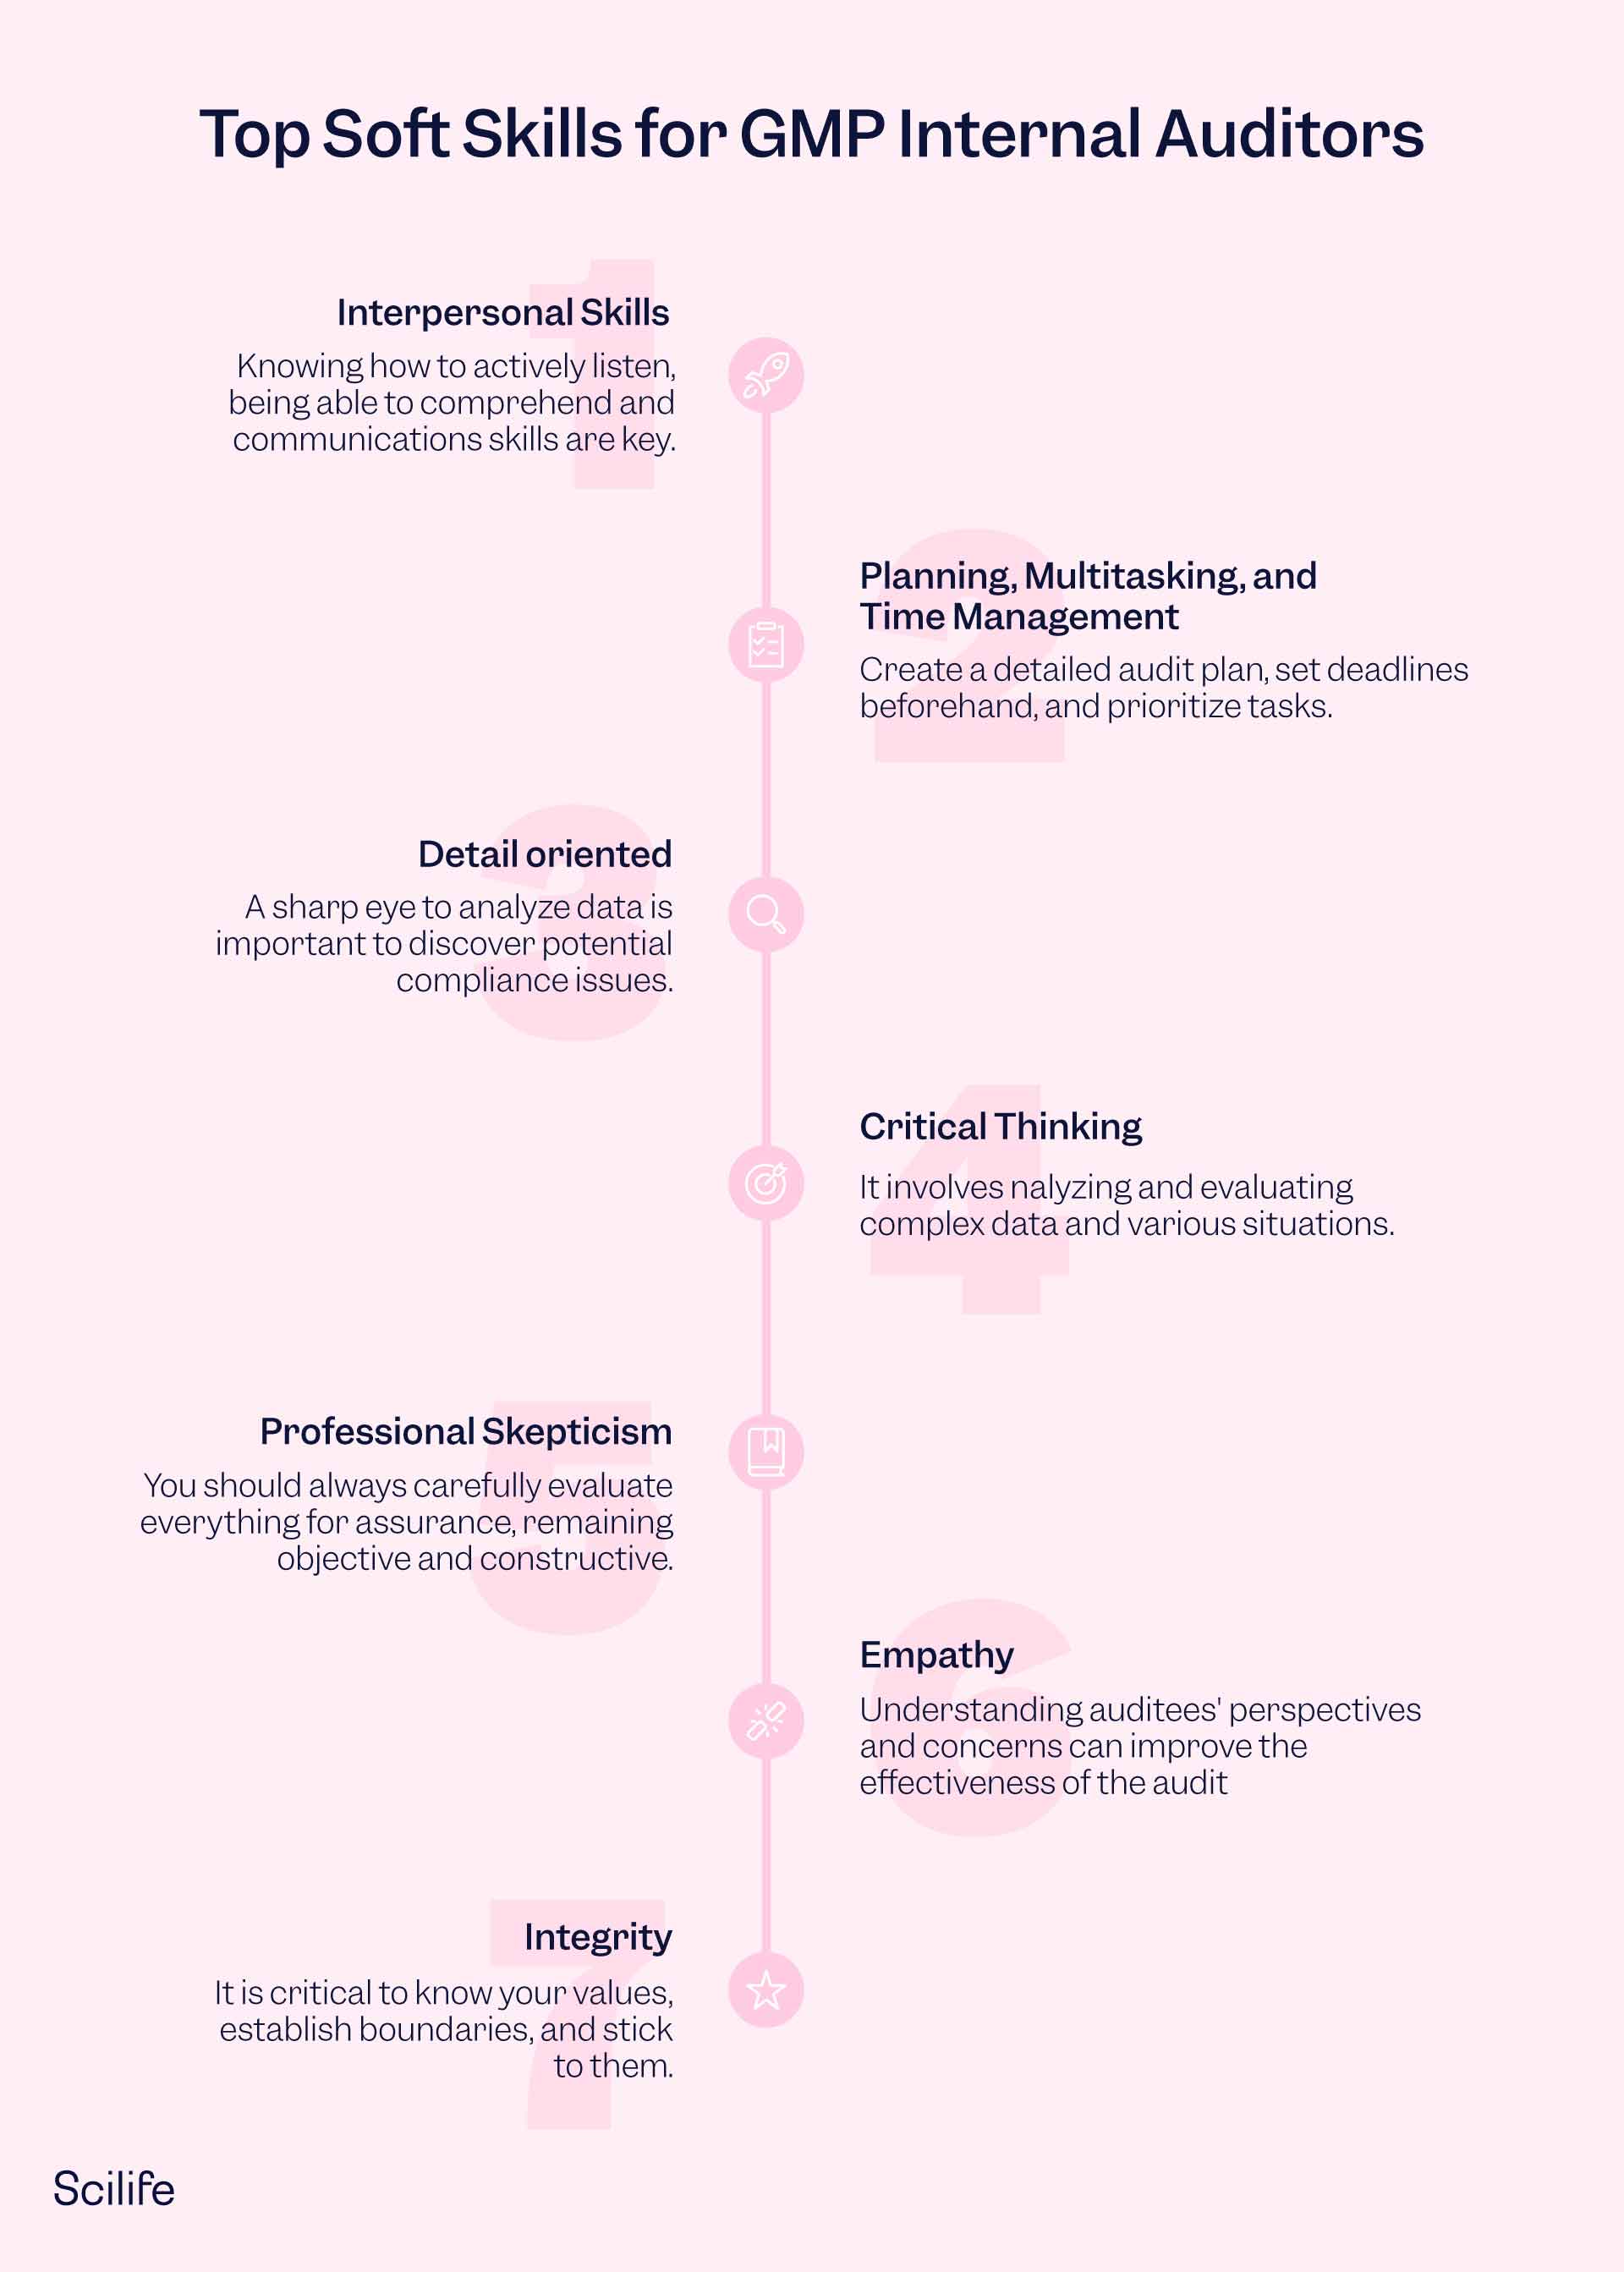 Infographic that represents Top Soft skills that every GMP Internal Auditor Should Develop by Scilife